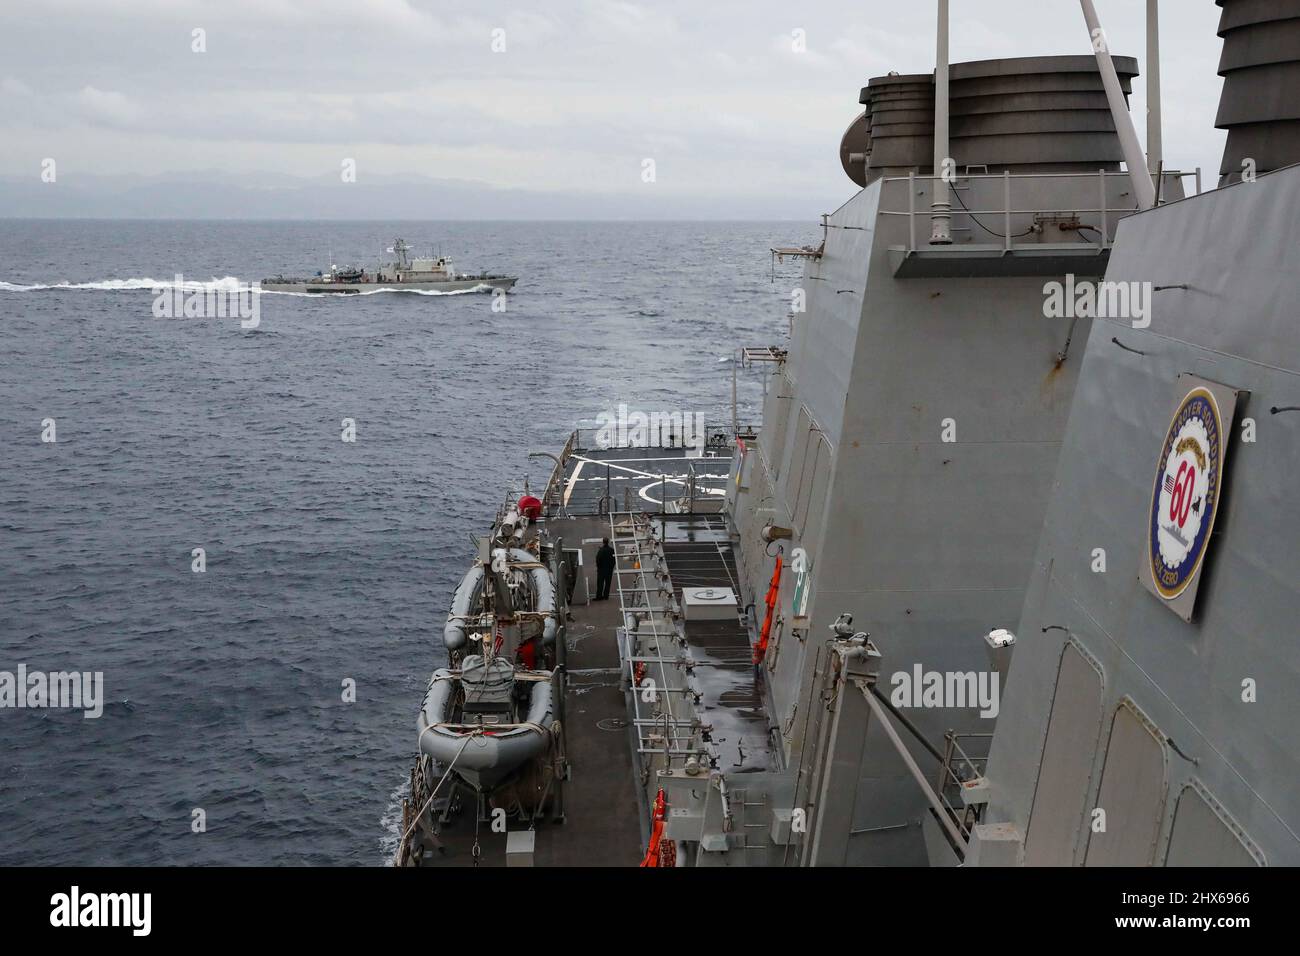 220302-N-UN585-1131 LIMASSOL, Cyprus (March 2, 2022) The Cypriot offshore patrol vessel Commodore Andreas Ioannides (P 61), left, conducts naval maneuvering exercises with the Arleigh Burke-class guided-missile destroyer USS Ross (DDG 71) as it leaves port in Limassol, Cyprus, March 2, 2022. Ross, forward-deployed to Rota, Spain, is on its 12th patrol in the U.S. Sixth Fleet area of operations in support of regional allies and partners and U.S. national security interests in Europe and Africa. (U.S. Navy photo by Mass Communication Specialist 2nd Class Claire DuBois/Released) Stock Photo